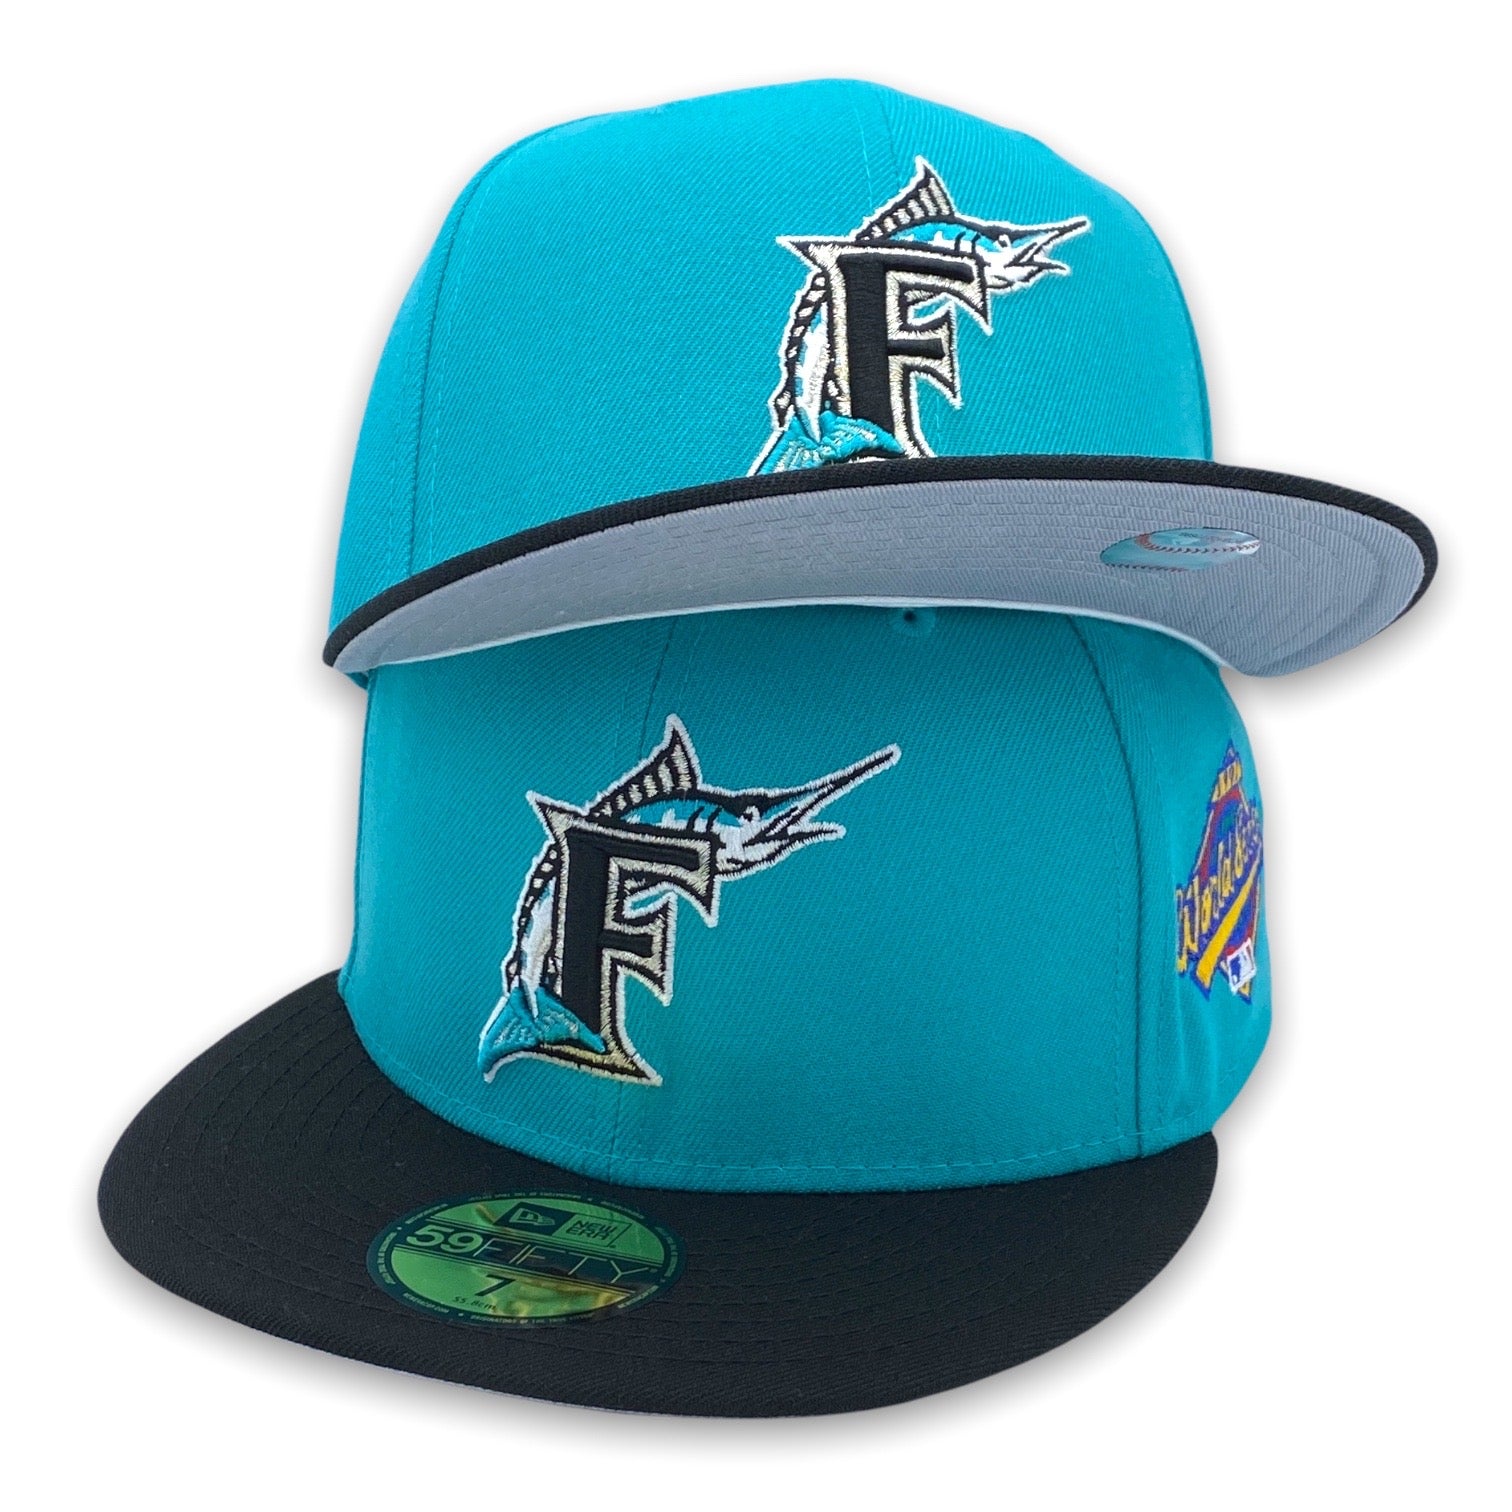 New Era 59FIFTY Silky Pink UV Miami Marlins 25th Anniversary of 1997 World Series Championship Patch Hat - Teal, Black Teal / 7 5/8